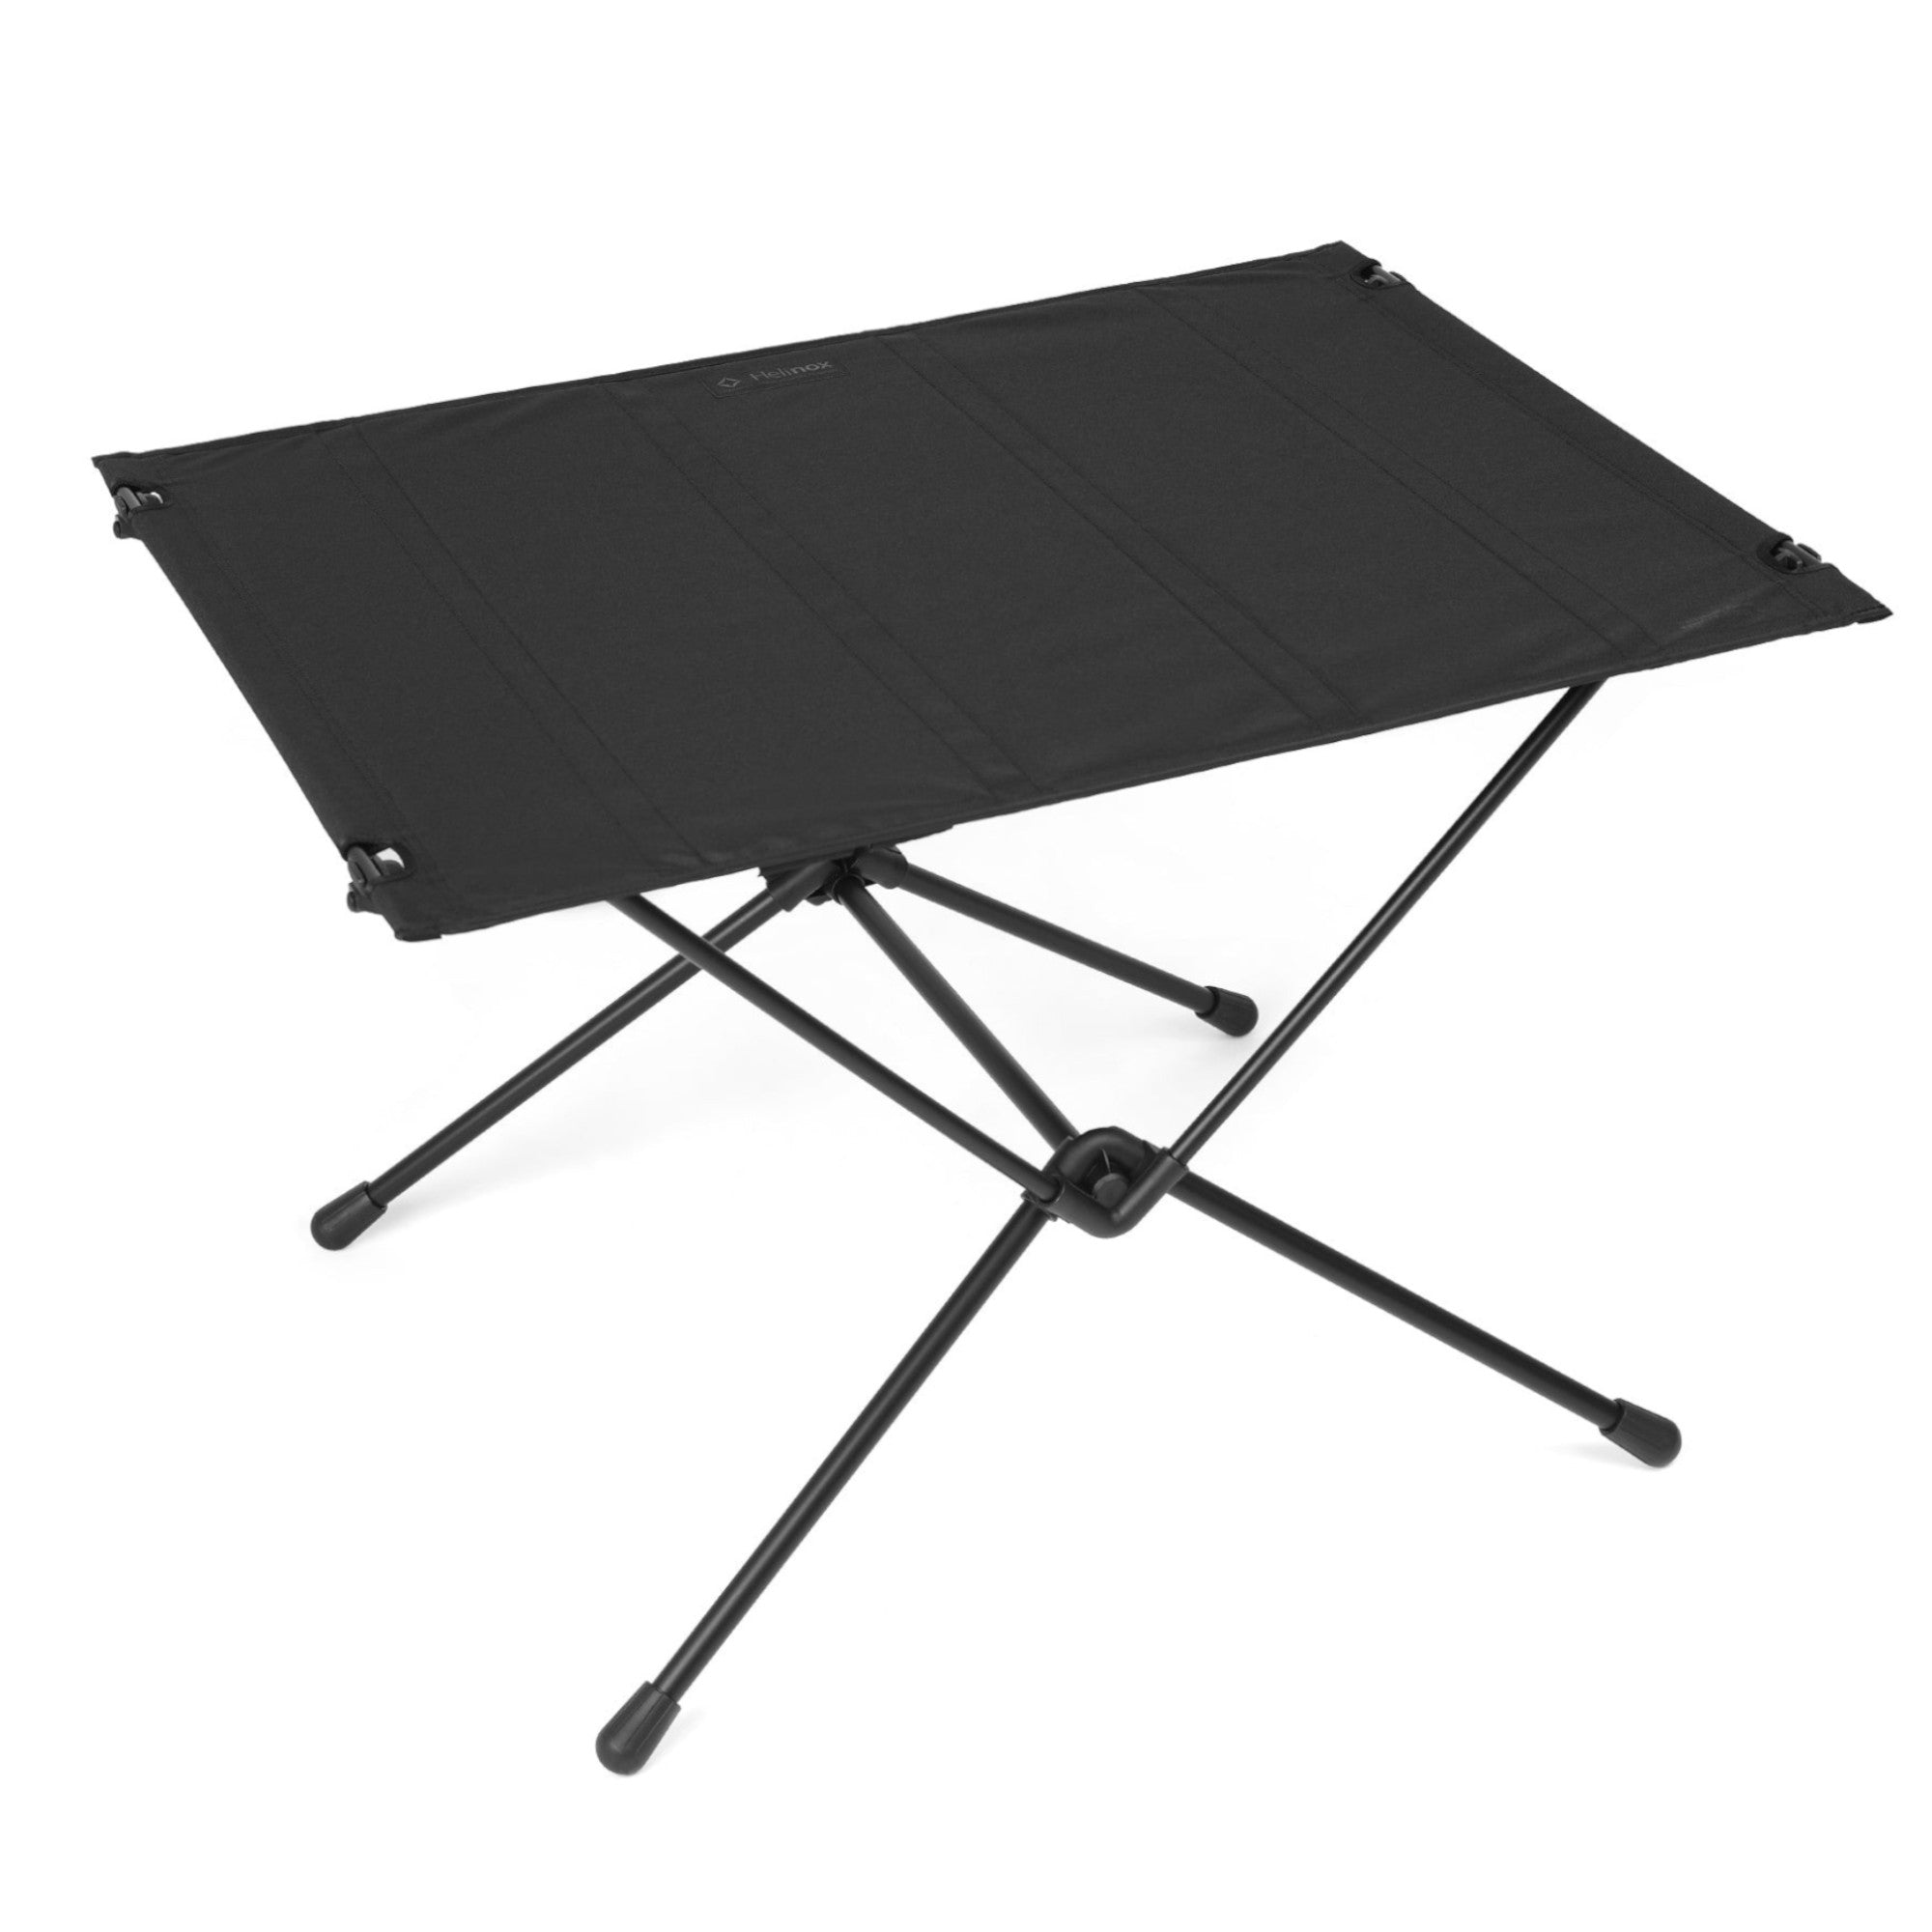 Helinox Table One Hard Top Large | Free Shipping & 5 Year Warranty